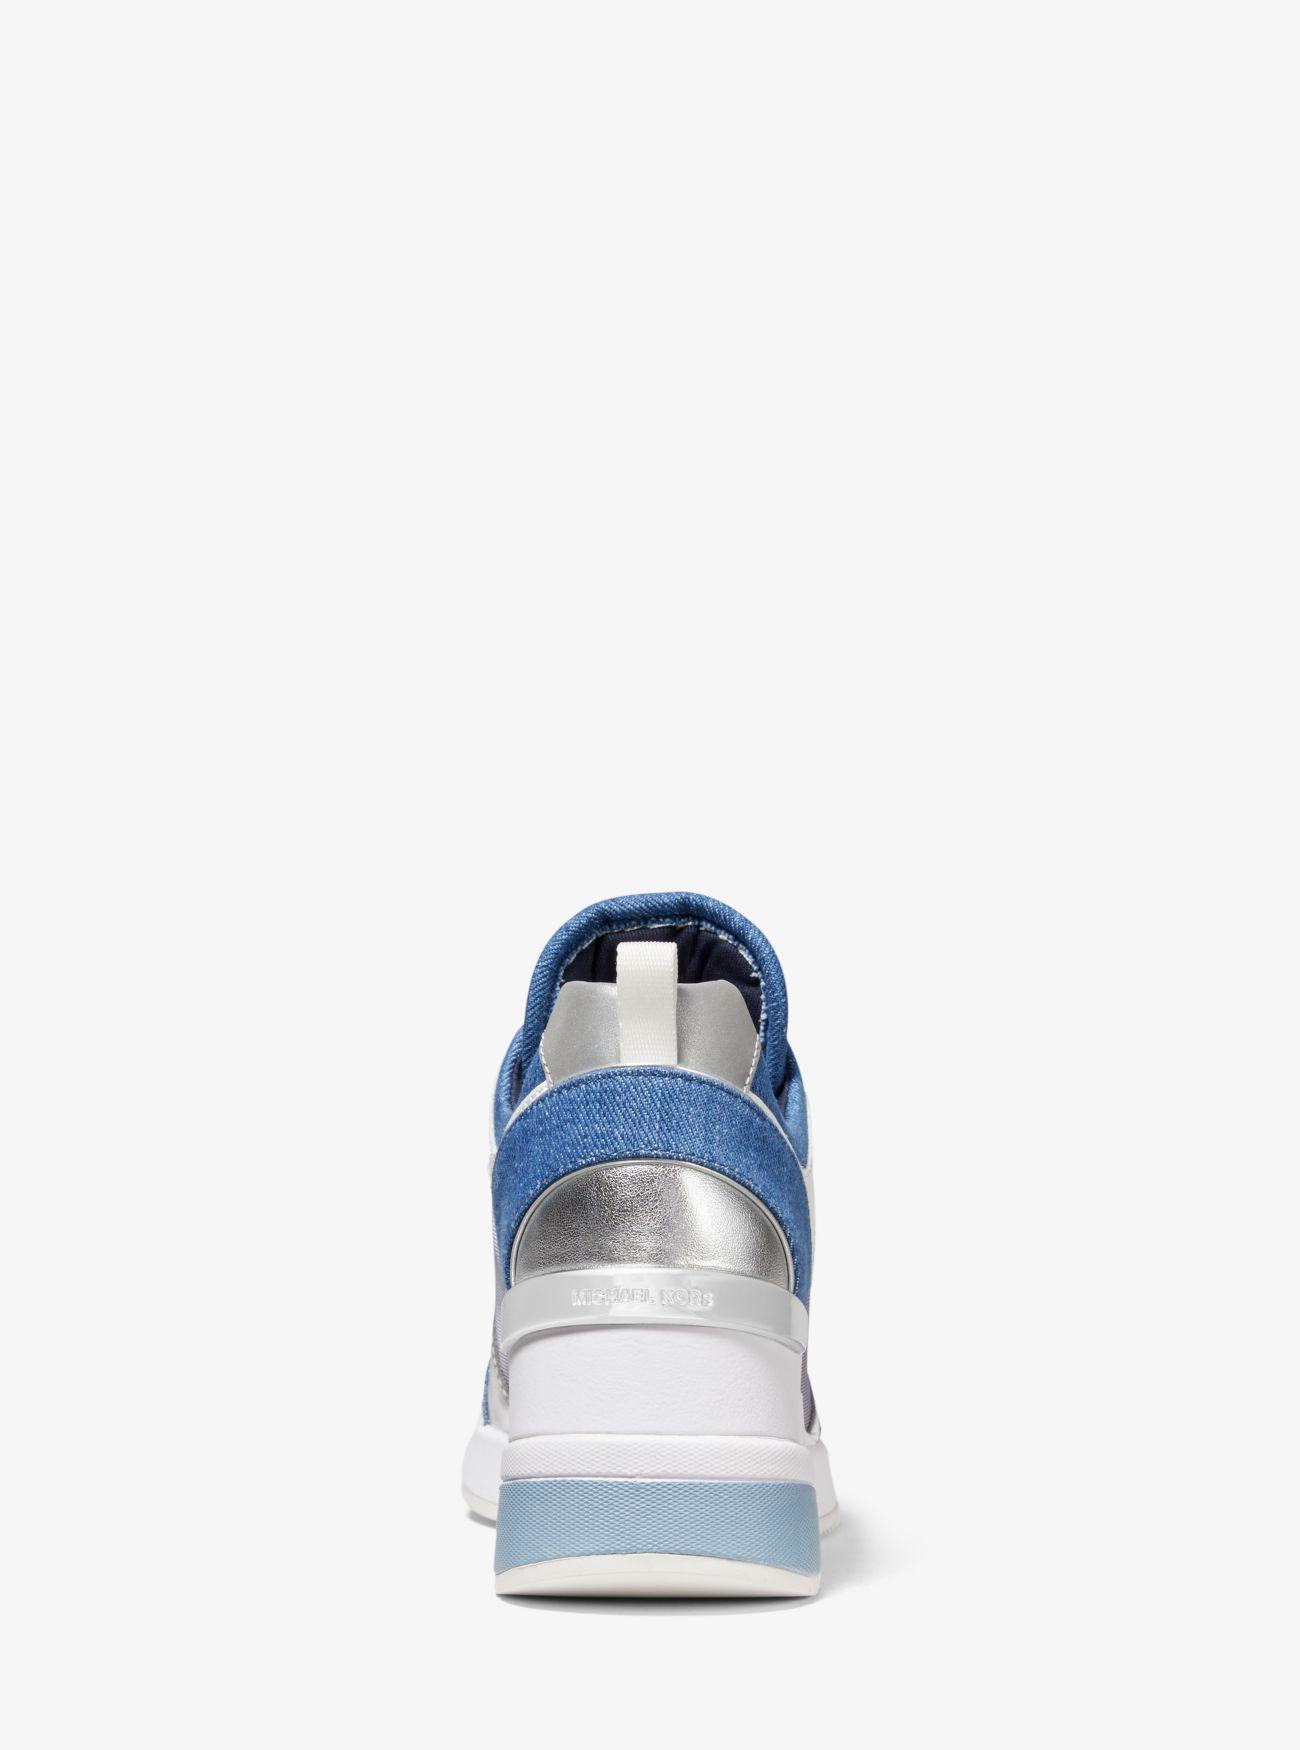 Michael Kors Georgie Denim And Leather Trainer in Blue | Lyst